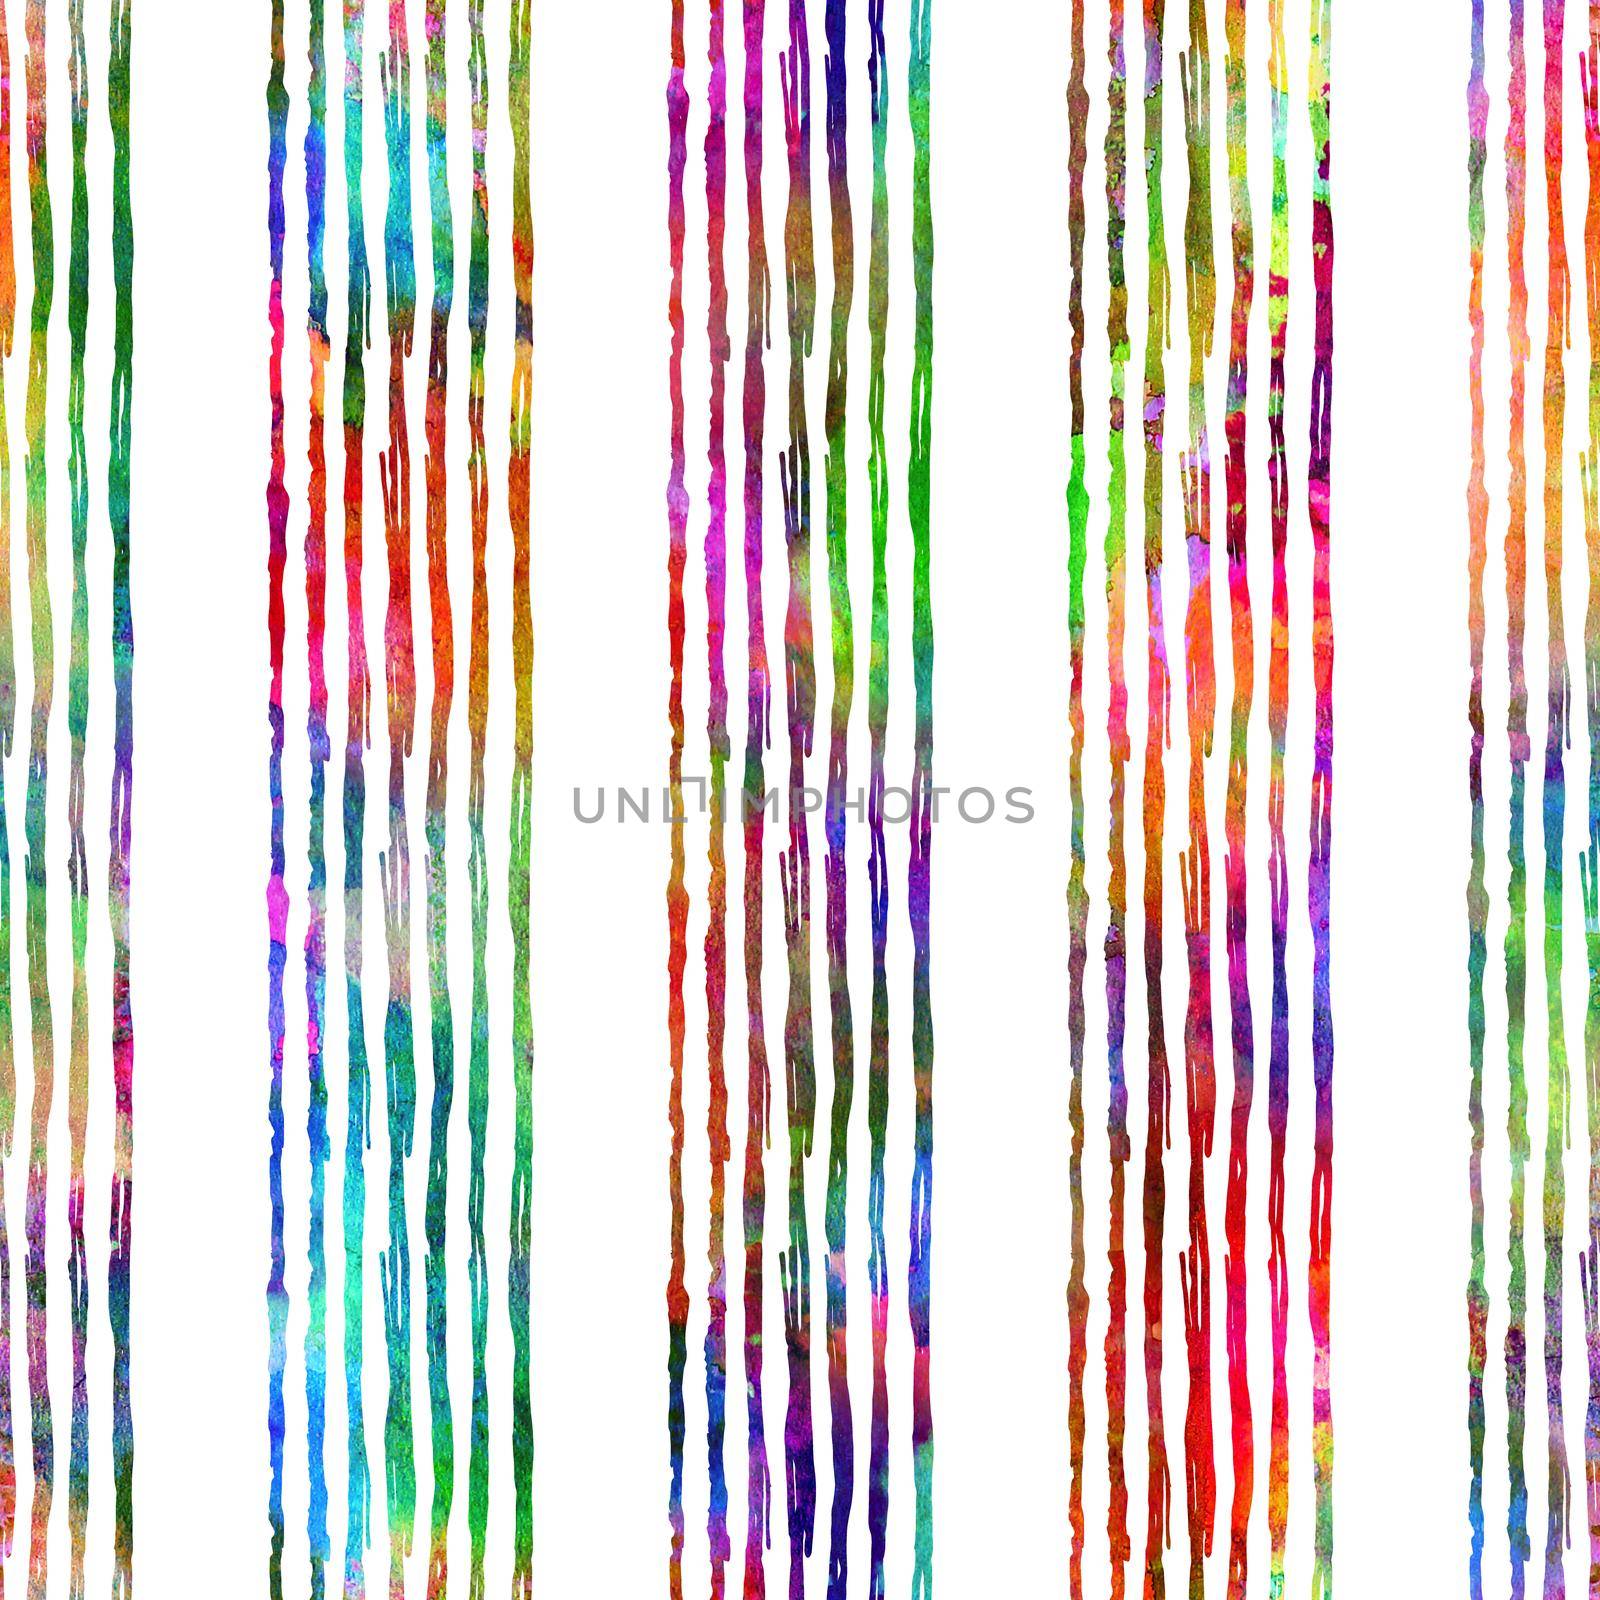 Brush Stroke Line Stripe Geometric Grung Pattern Seamless in Rainbow Color Background. Gunge Collage Watercolor Texture for Teen and School Kids Fabric Prints Grange Design with lines.